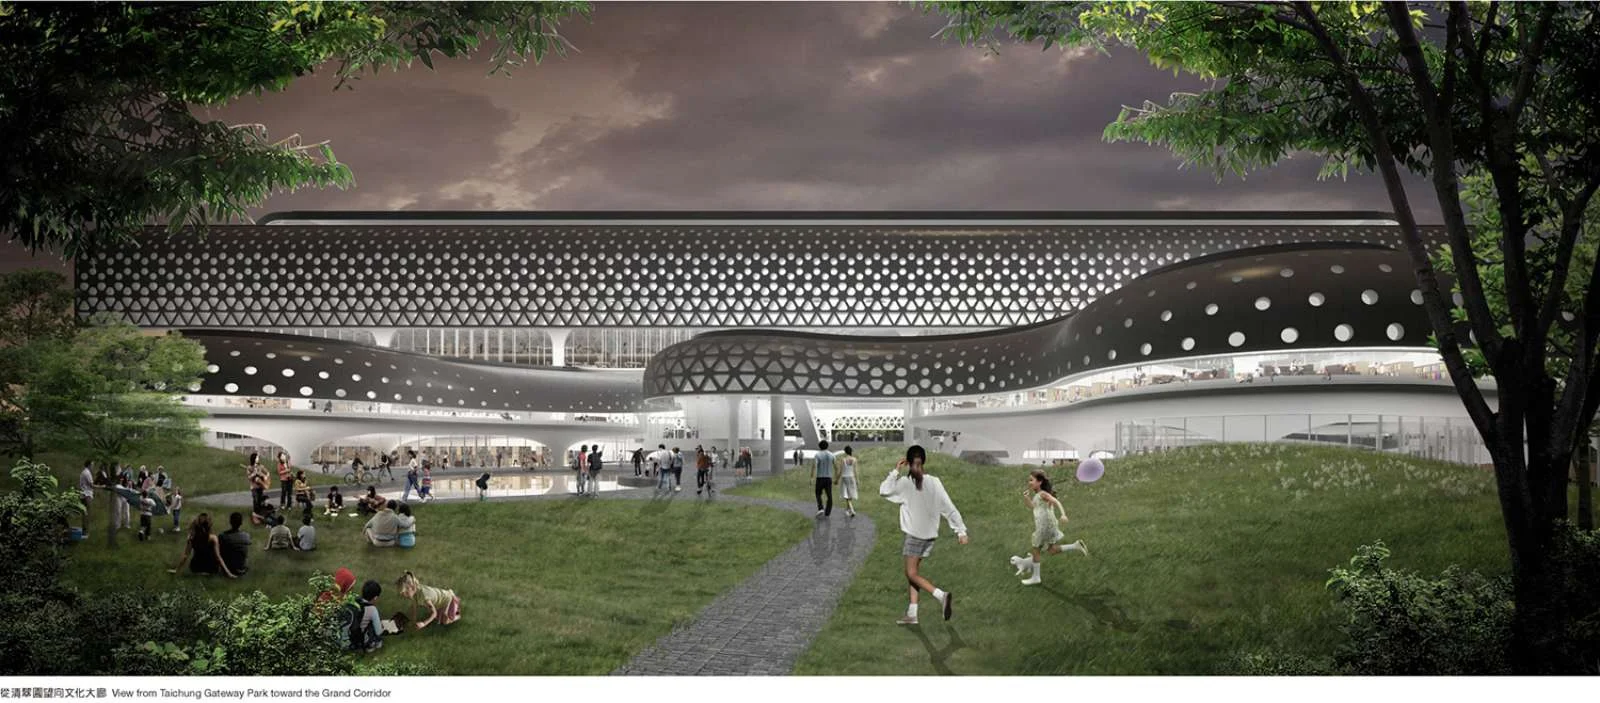 Mass Studies (South Korea) with joint tenderer Q-Lab (Taiwan) and Wang Architects & Associates (Taiwan) 